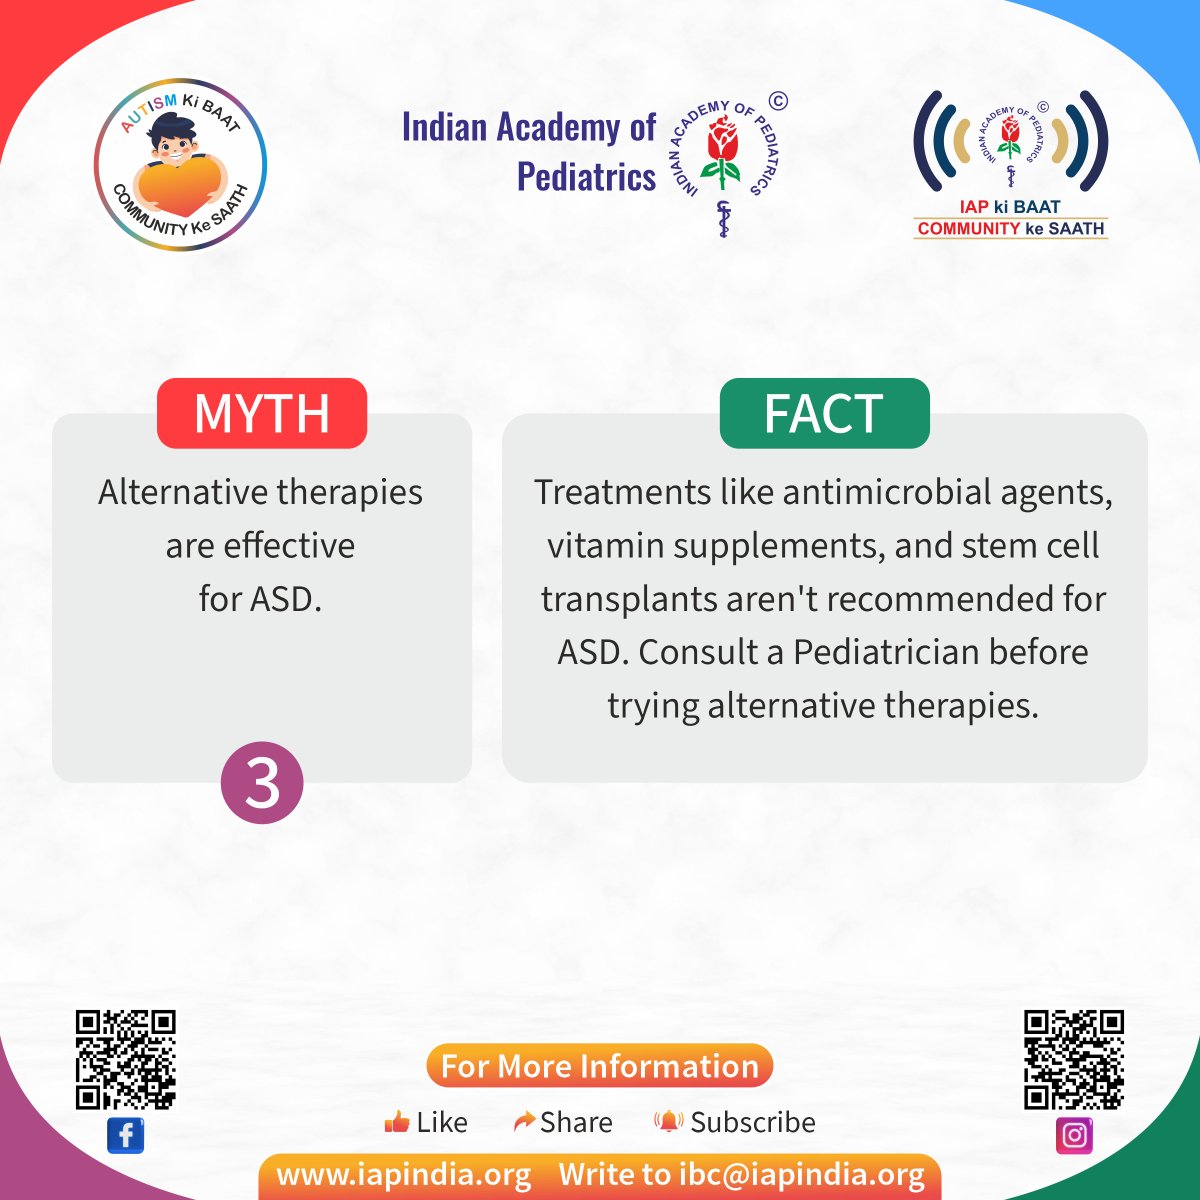 Get the 𝐅𝐀𝐂𝐓𝐒 on effective treatments for 𝐀𝐒𝐃 🧠 💙 Make informed decisions for your 𝐜𝐡𝐢𝐥𝐝'𝐬 𝐡𝐞𝐚𝐥𝐭𝐡 and well-being. #iapkibaat #iap #indianacademyofpediatrics #pediatrics #pediatricians #childcare #childhealth #healthcare #autismawareness #autism